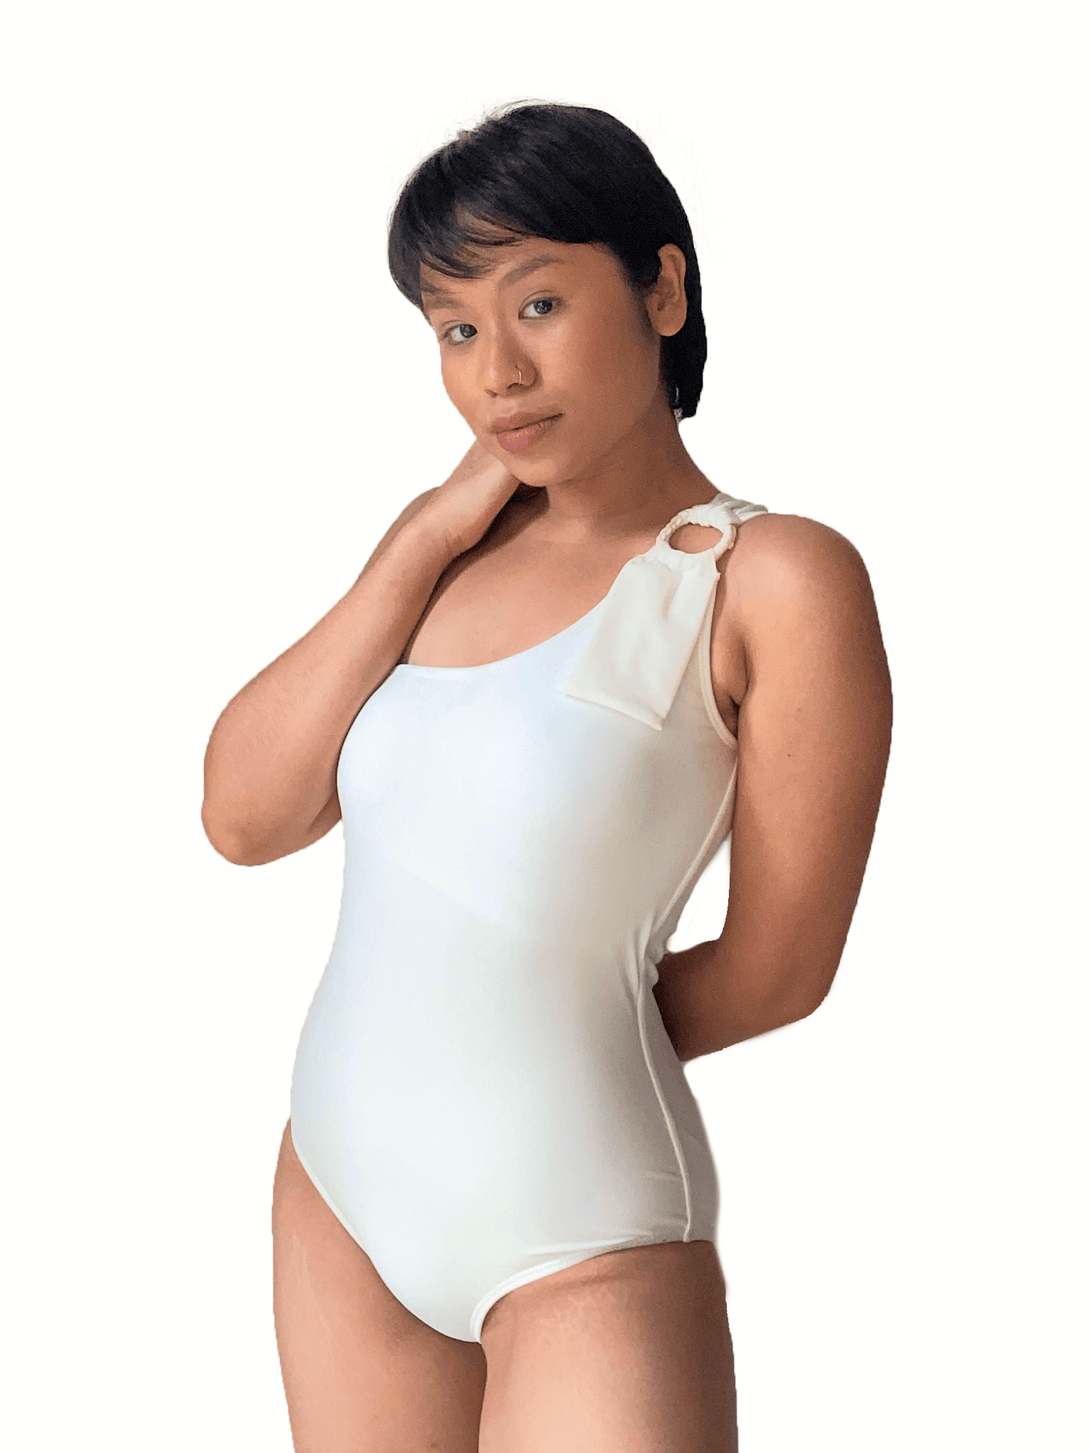 Aphrodite One Shoulder Toga Ring Swimsuit in White - Pink N' Proper